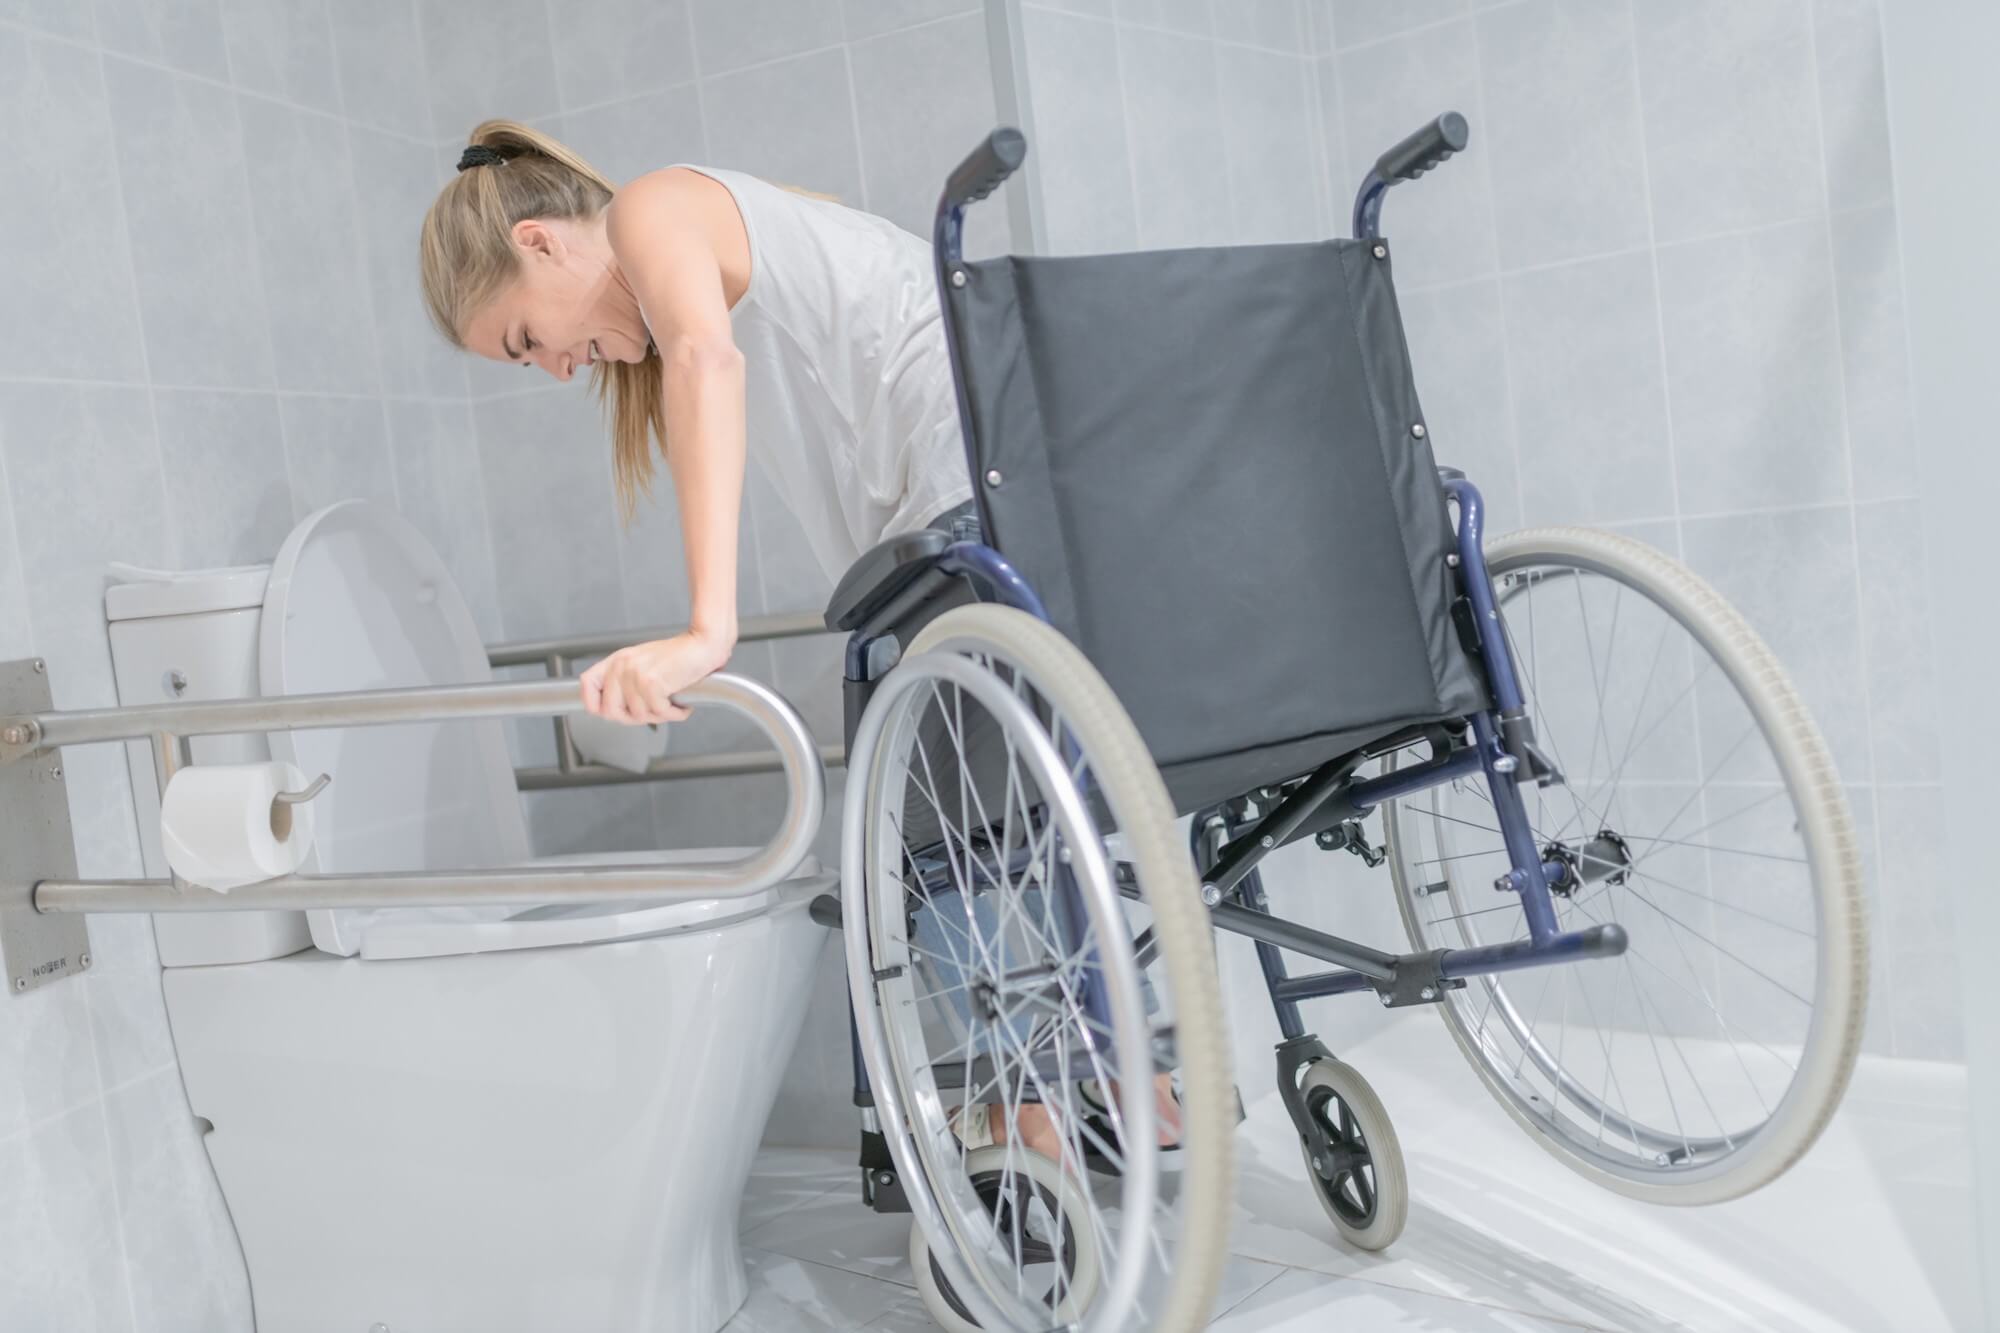 Woman wheelchair user struggling to use the restroom